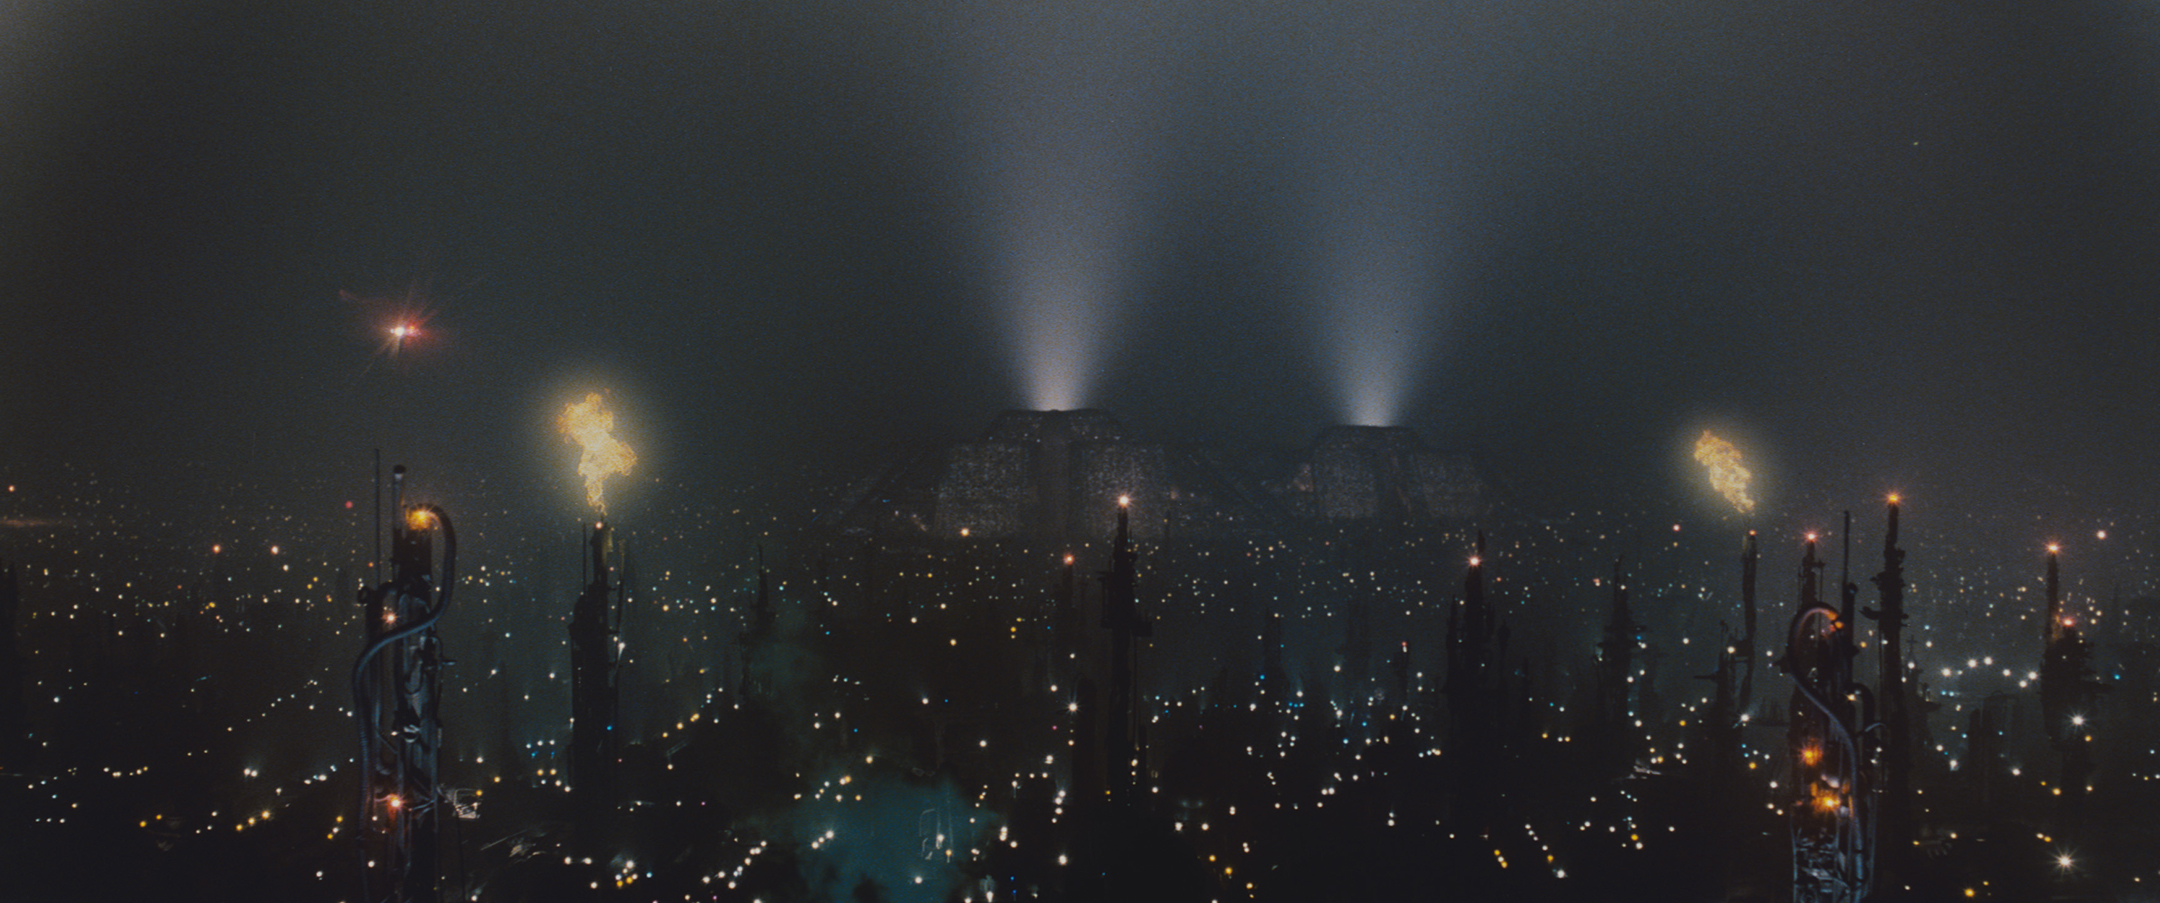 Scene from the film Blade Runner of a polluted Los Angeles of the future seen from the air